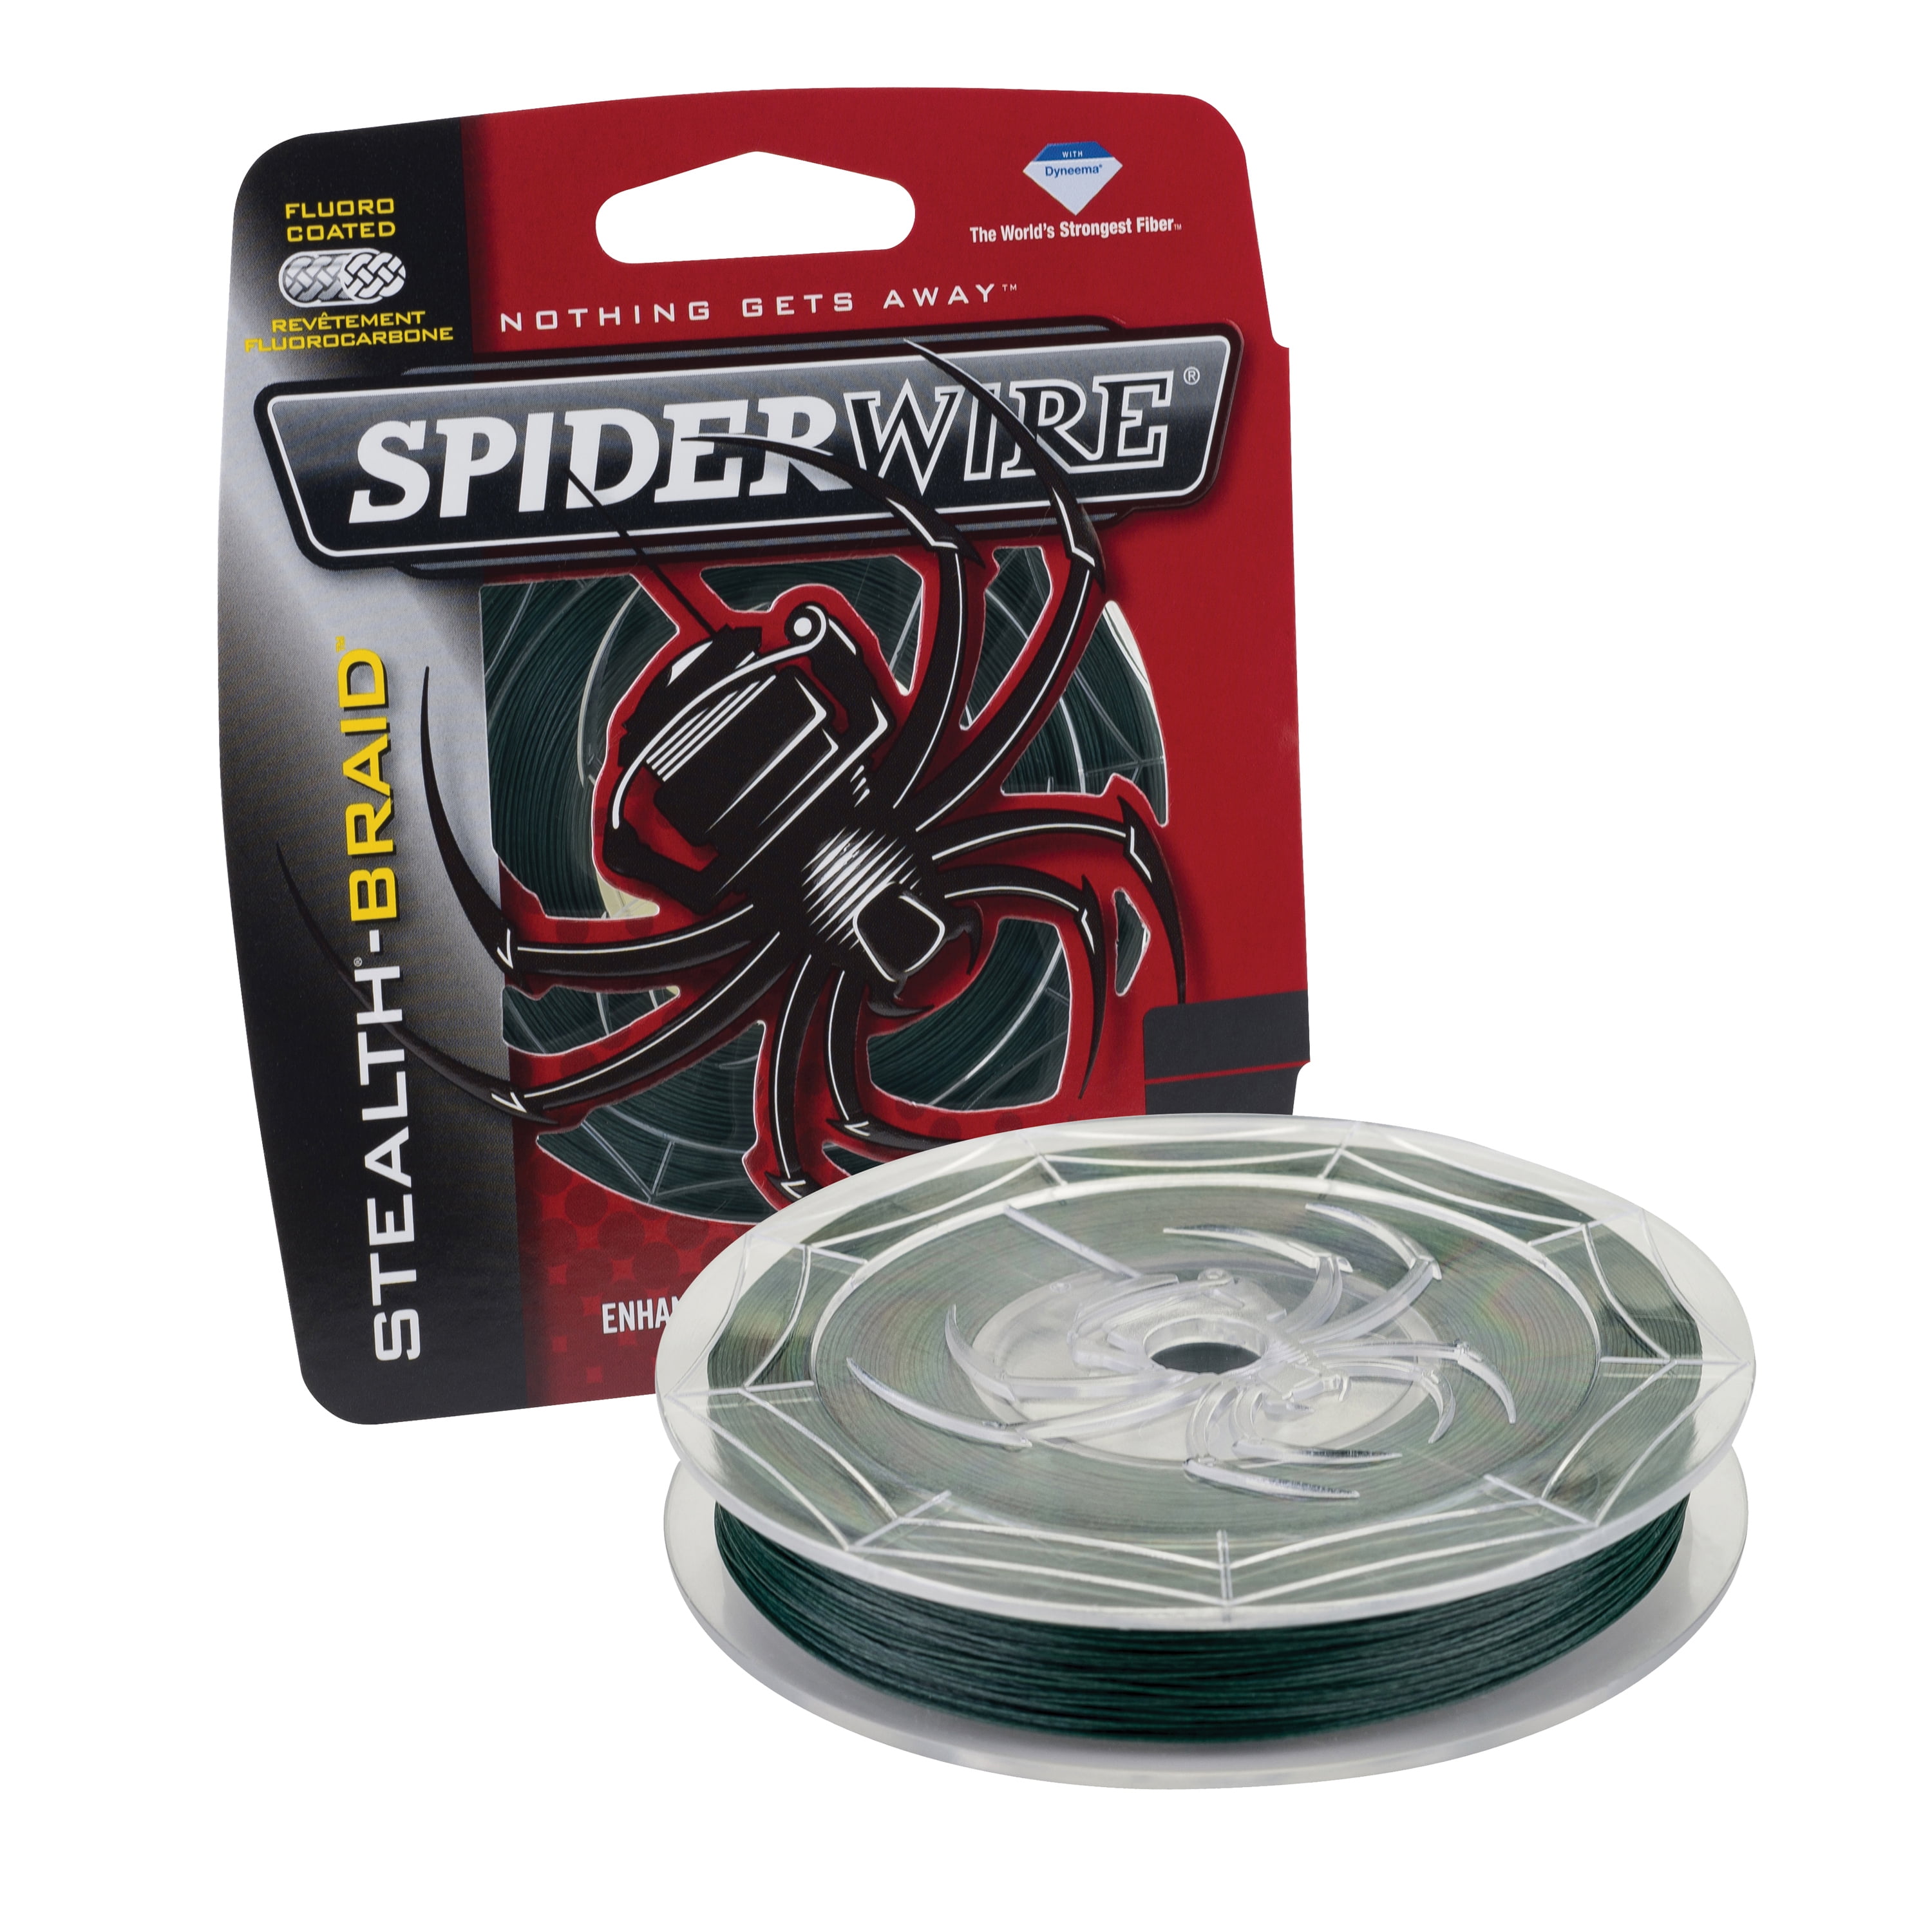 Pioneer Invisible Fluorocarbon Pink Fishing Leader Line - 40Lb, Shop  Today. Get it Tomorrow!